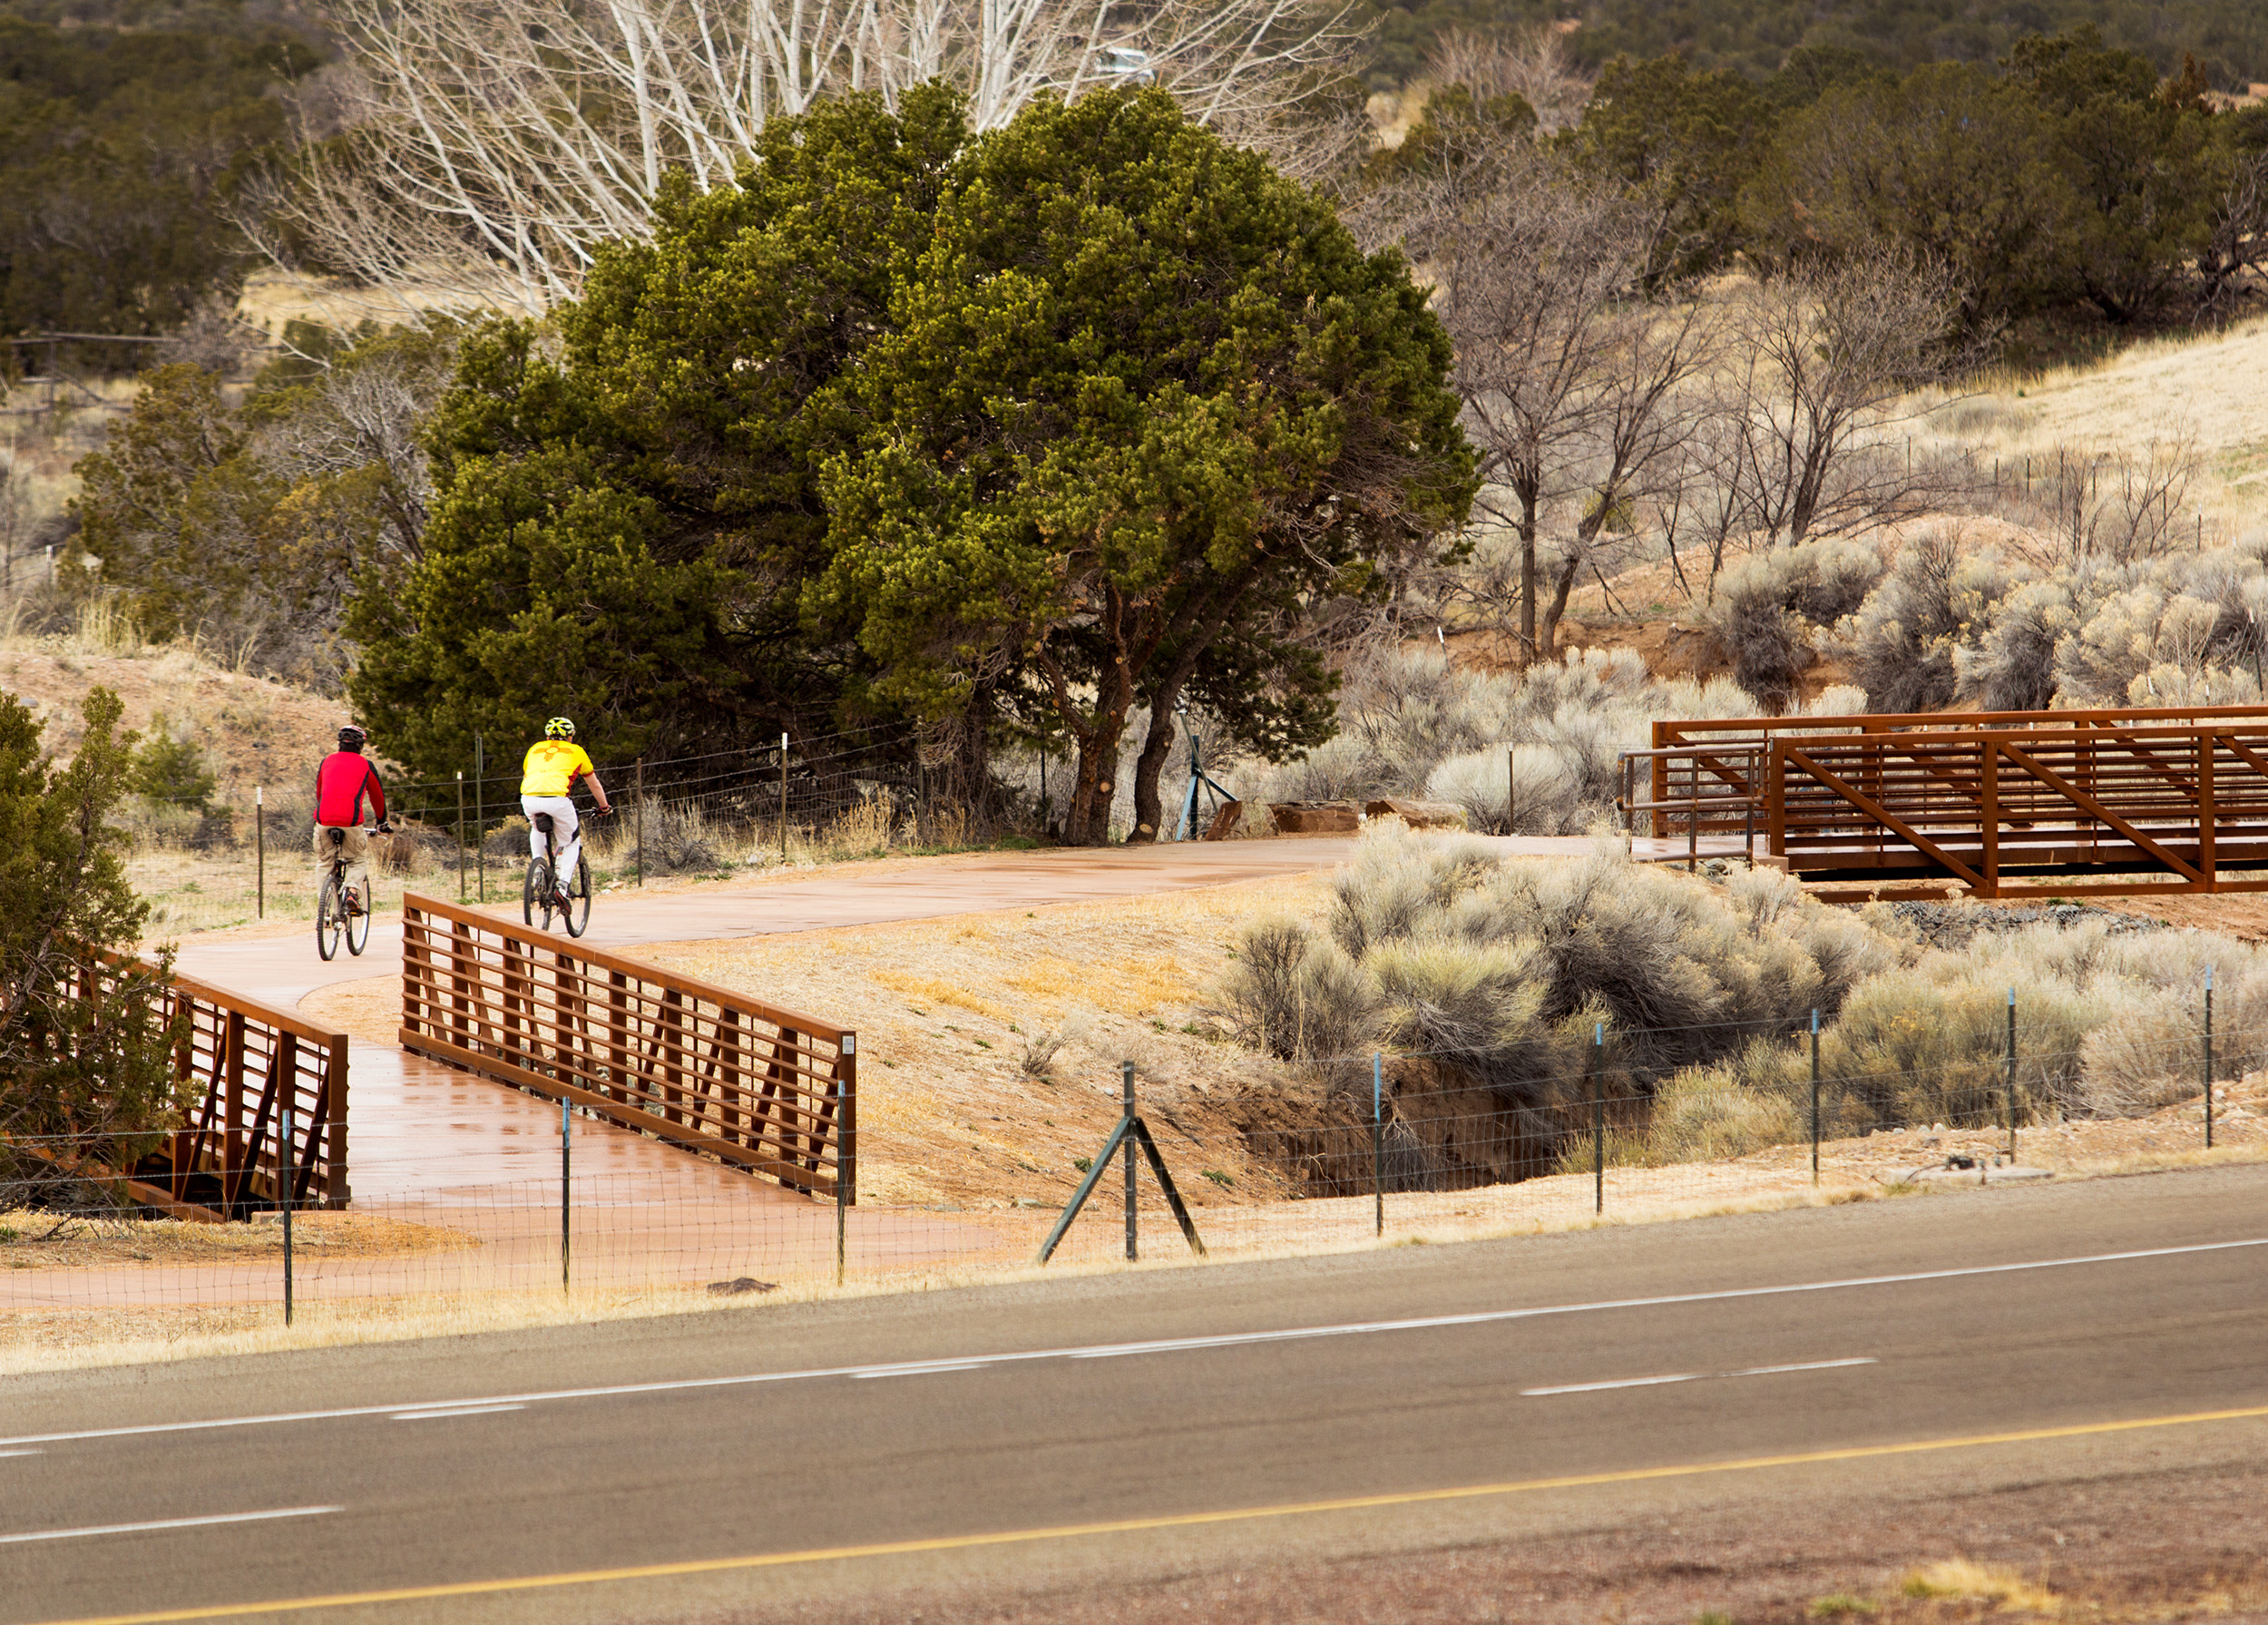 Wilson & Company worked with the City of Santa Fe, NM, to develop a Trails Master Plan  to formalize the 25+ miles of wilderness trails for hikers, bikers, and equestrians.